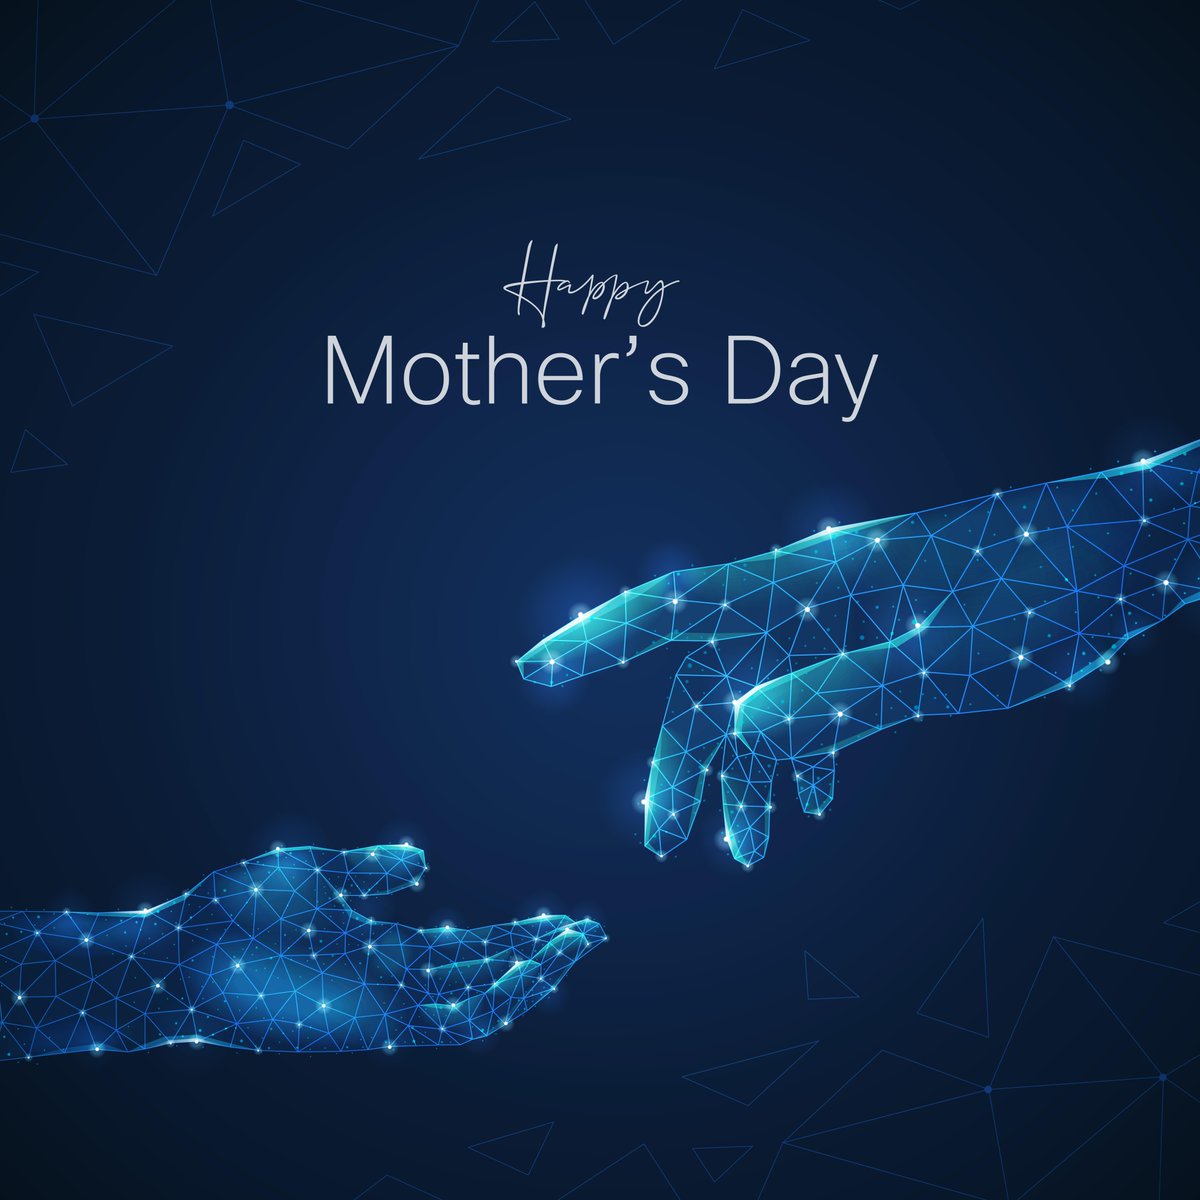 Celebrating all the incredible moms who nurture the connections that matter most. #HappyMothersDay! 💝 🌸